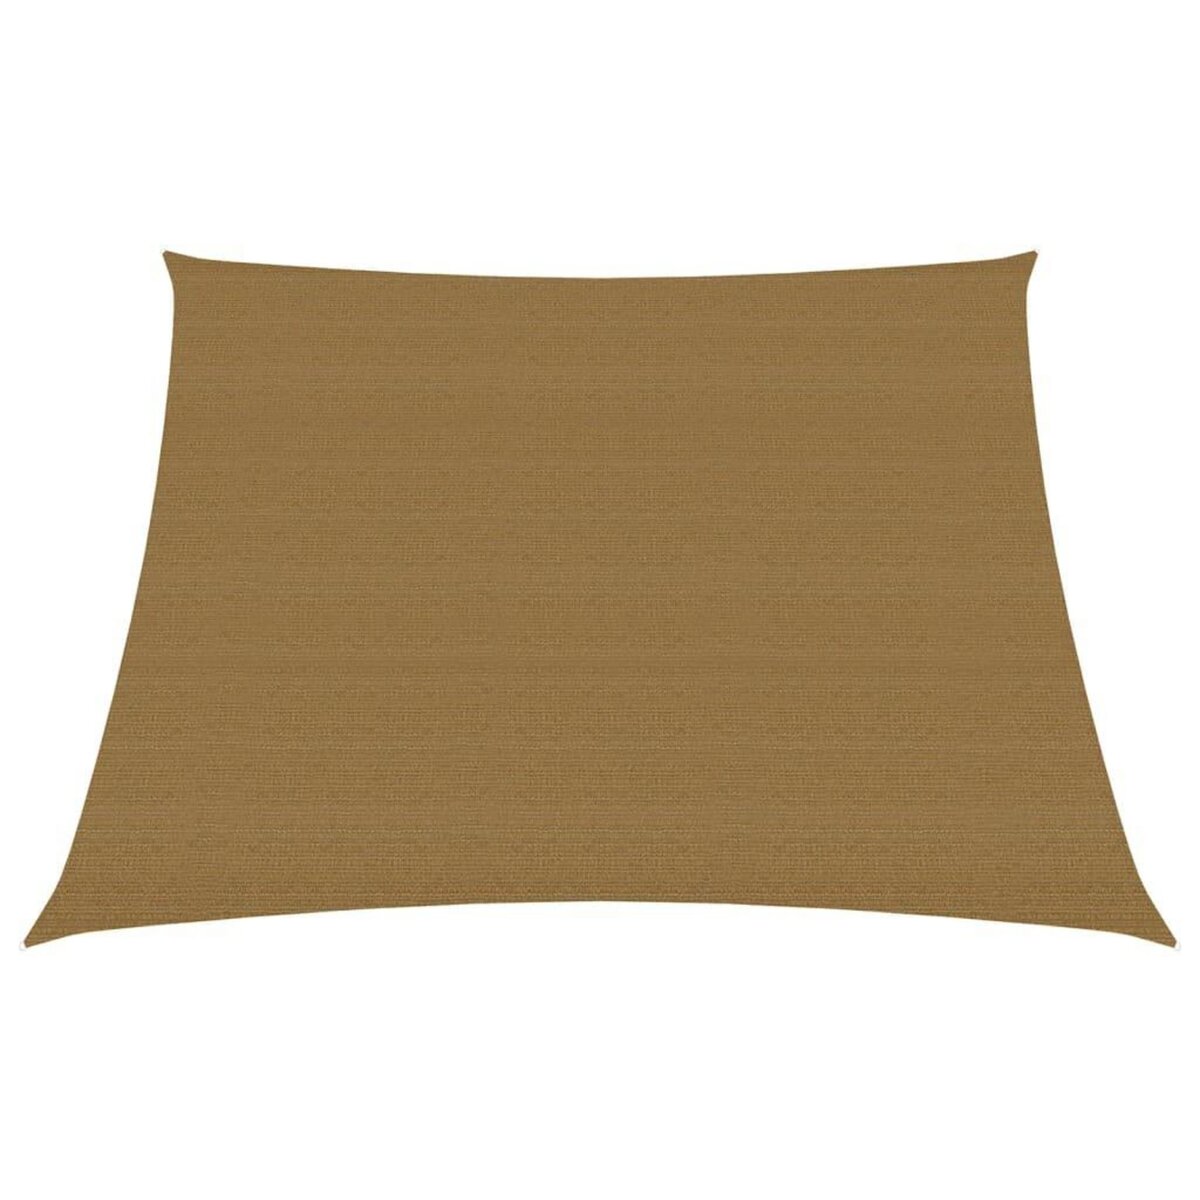 VIDAXL Voile d'ombrage 160 g/m^2 Taupe 3/4x2 m PEHD